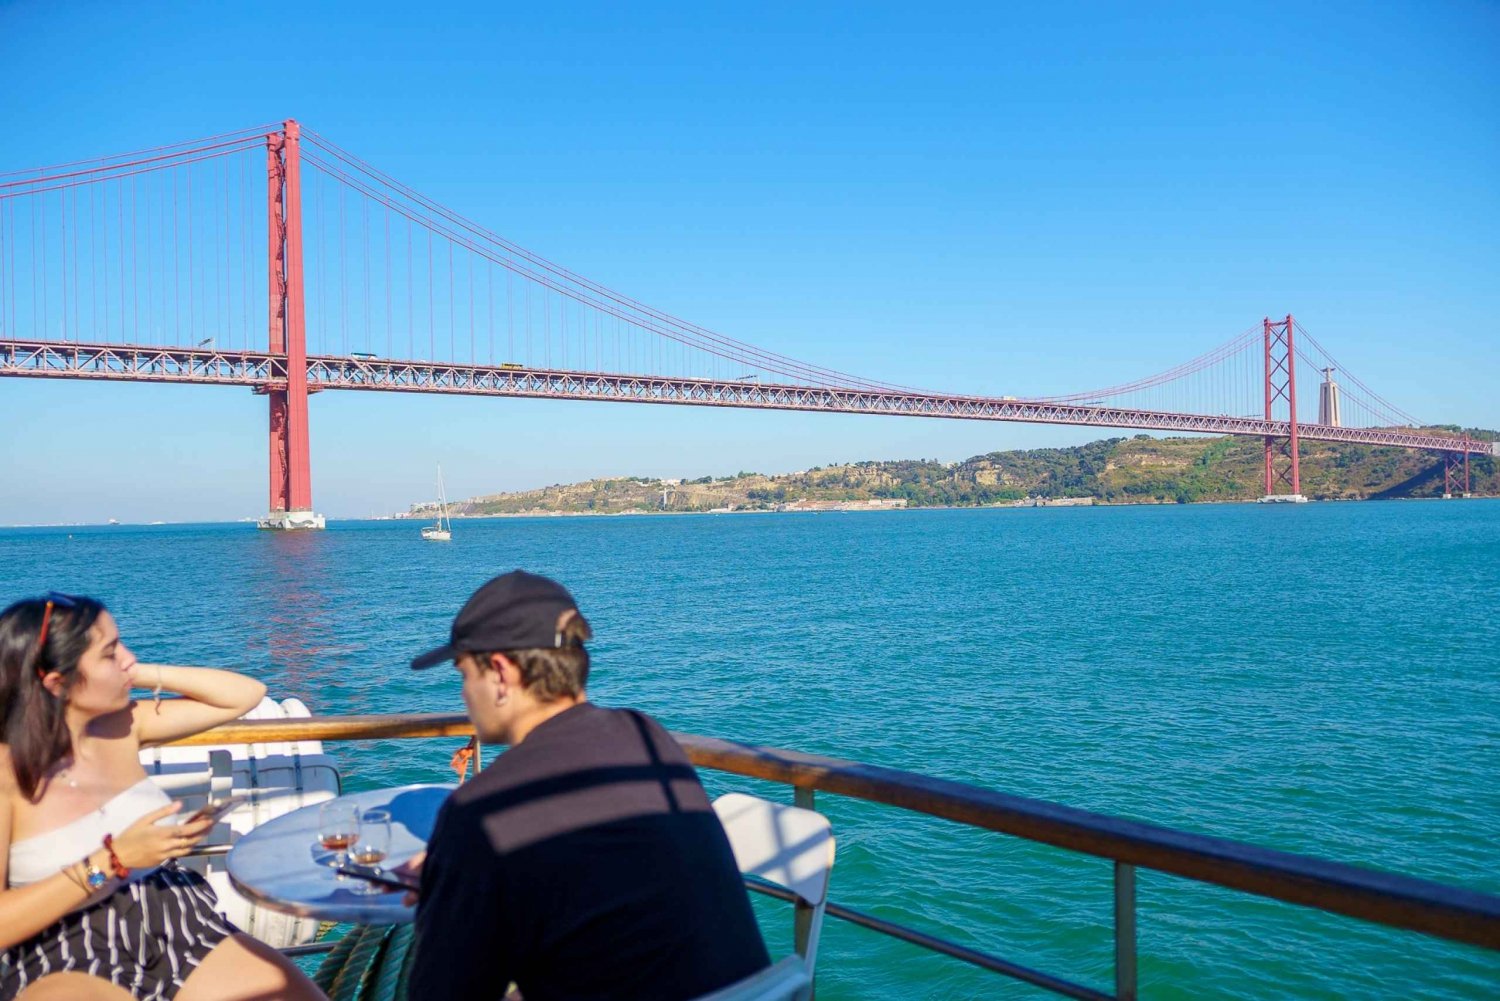 Lisbon: Tagus River Boat Tour with One Drink Included